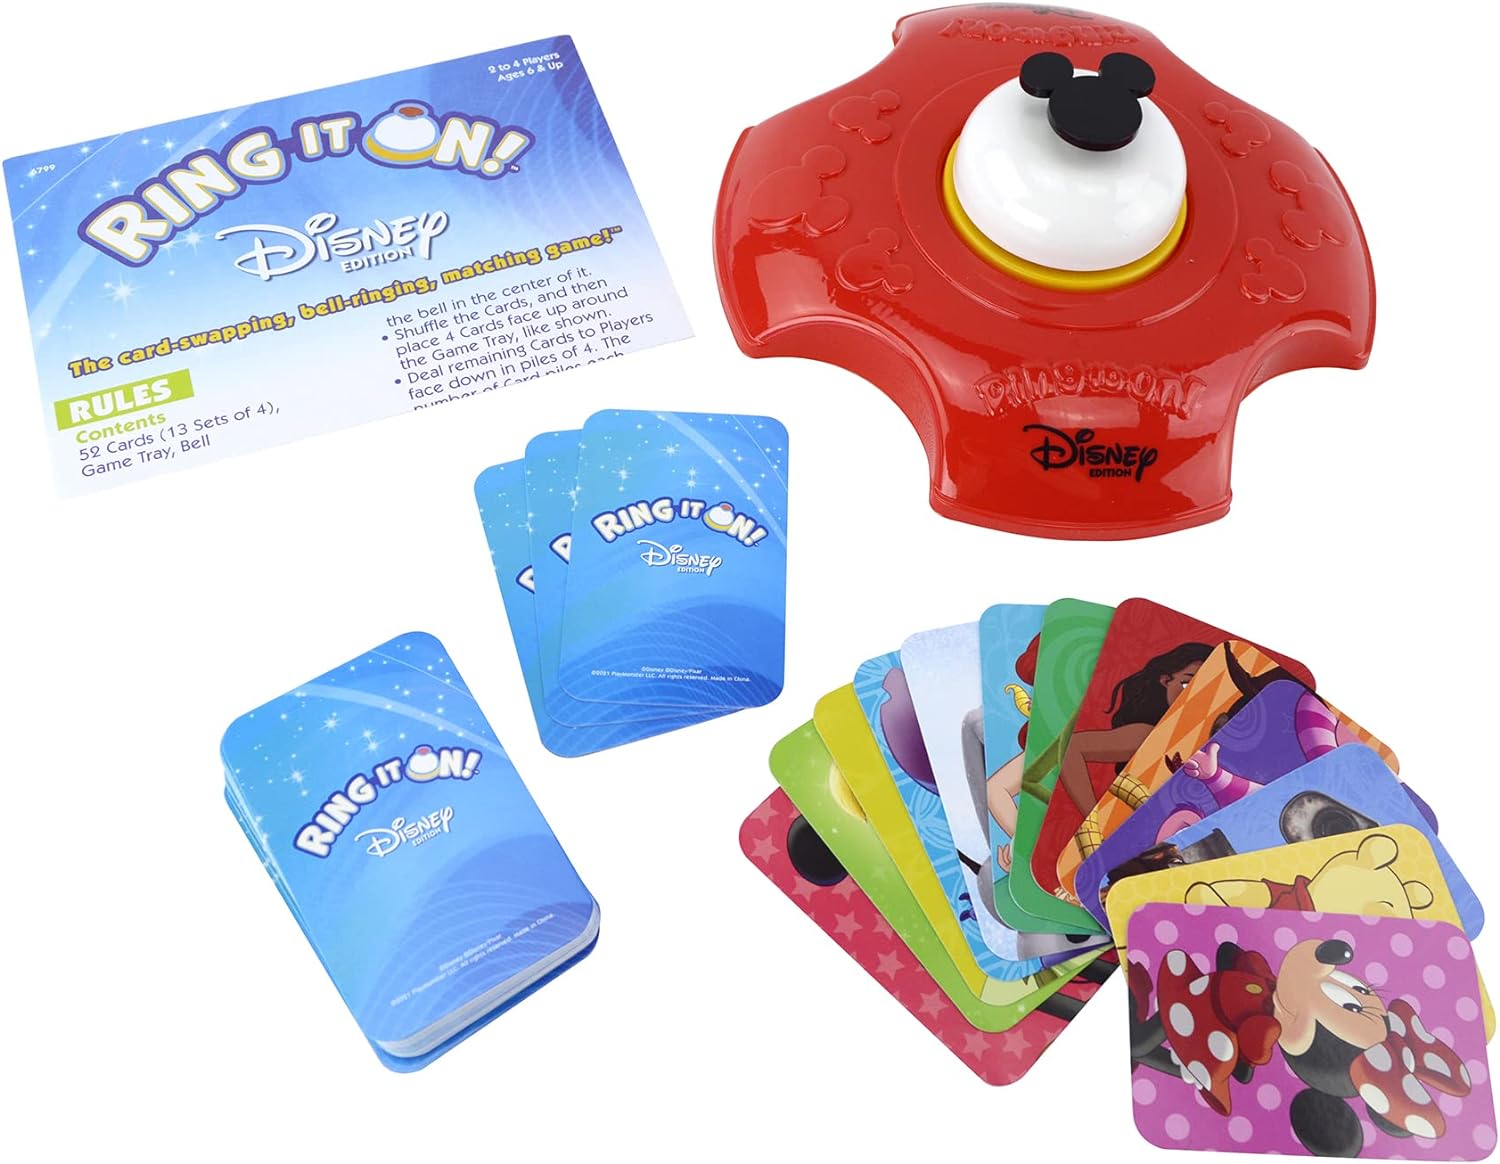 Disney Ring It On! The Card-Swapping, Bell-Ringing, Matching Game!